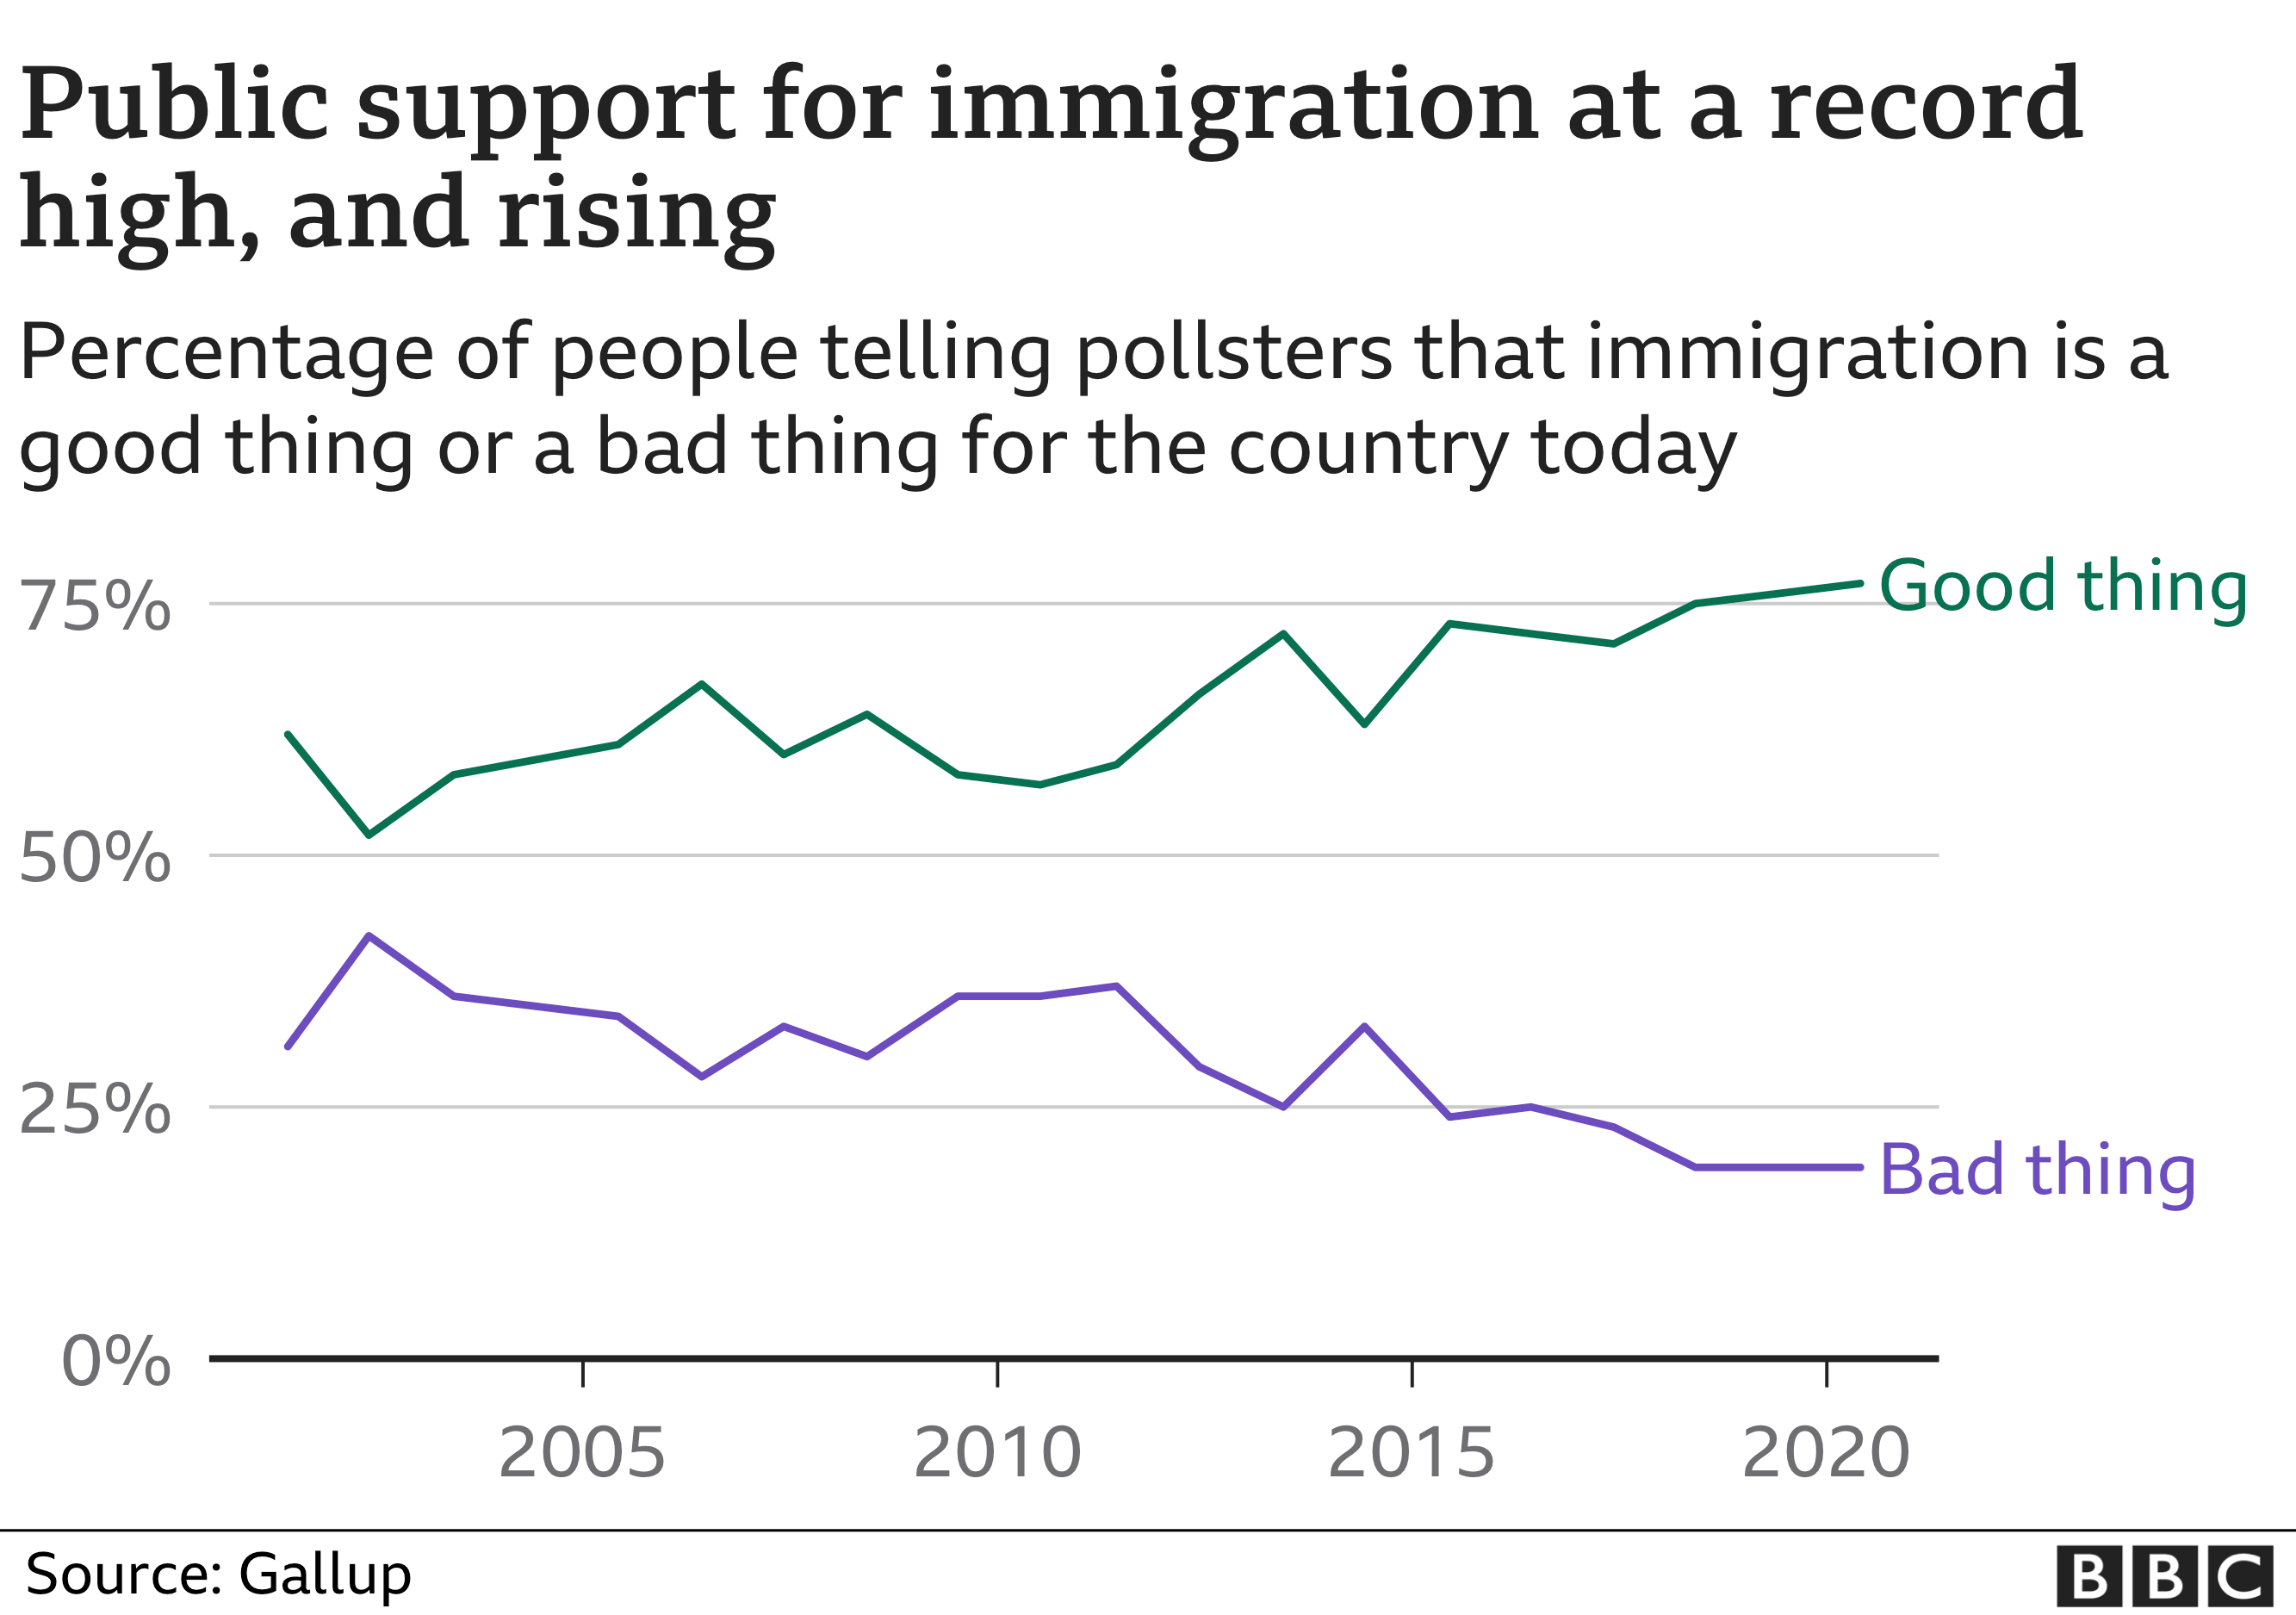 Public support for immigration at a record high, and rising